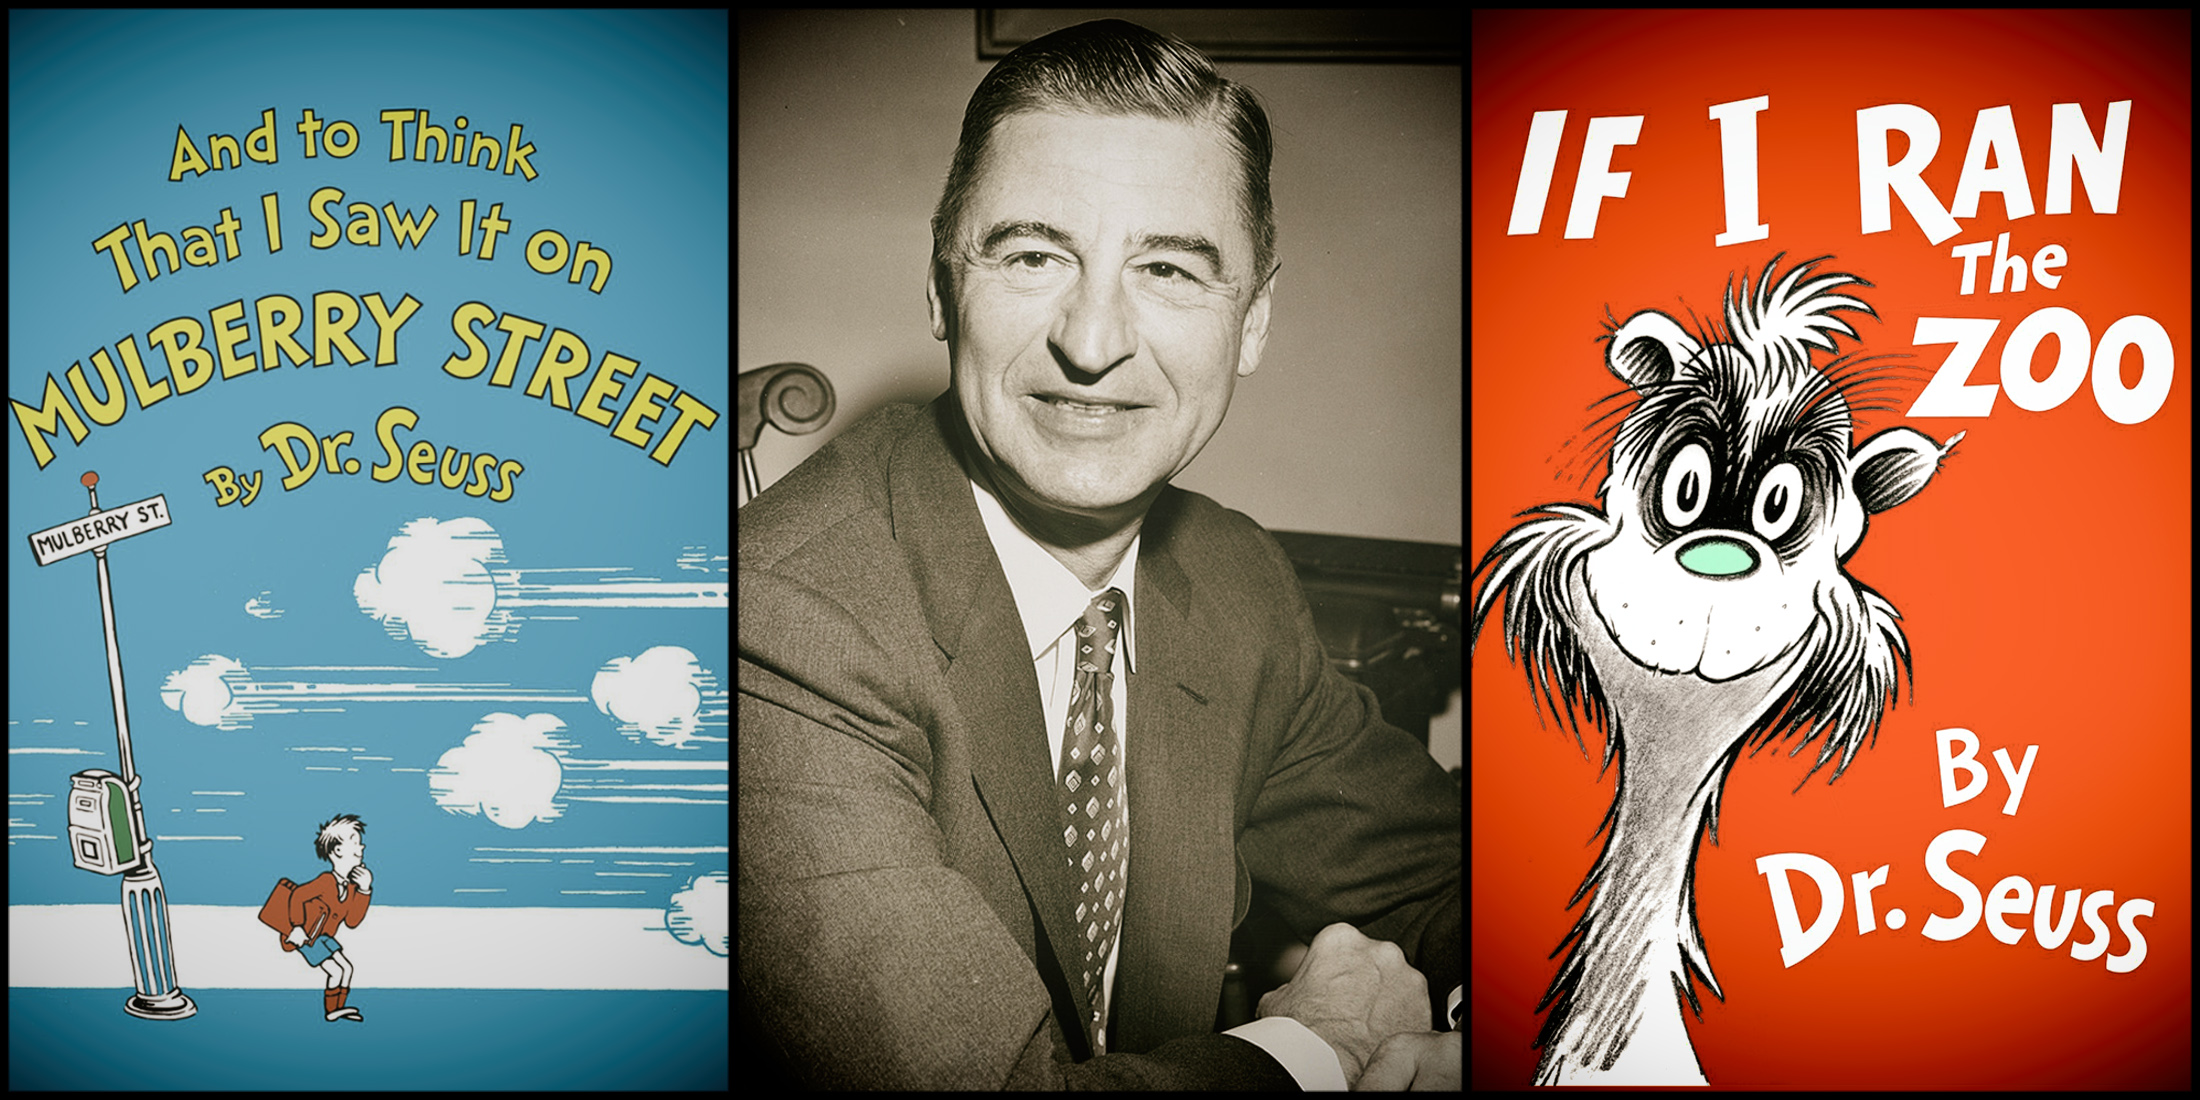 Dr Seuss on the chopping block It’s a cancel culture thing, says